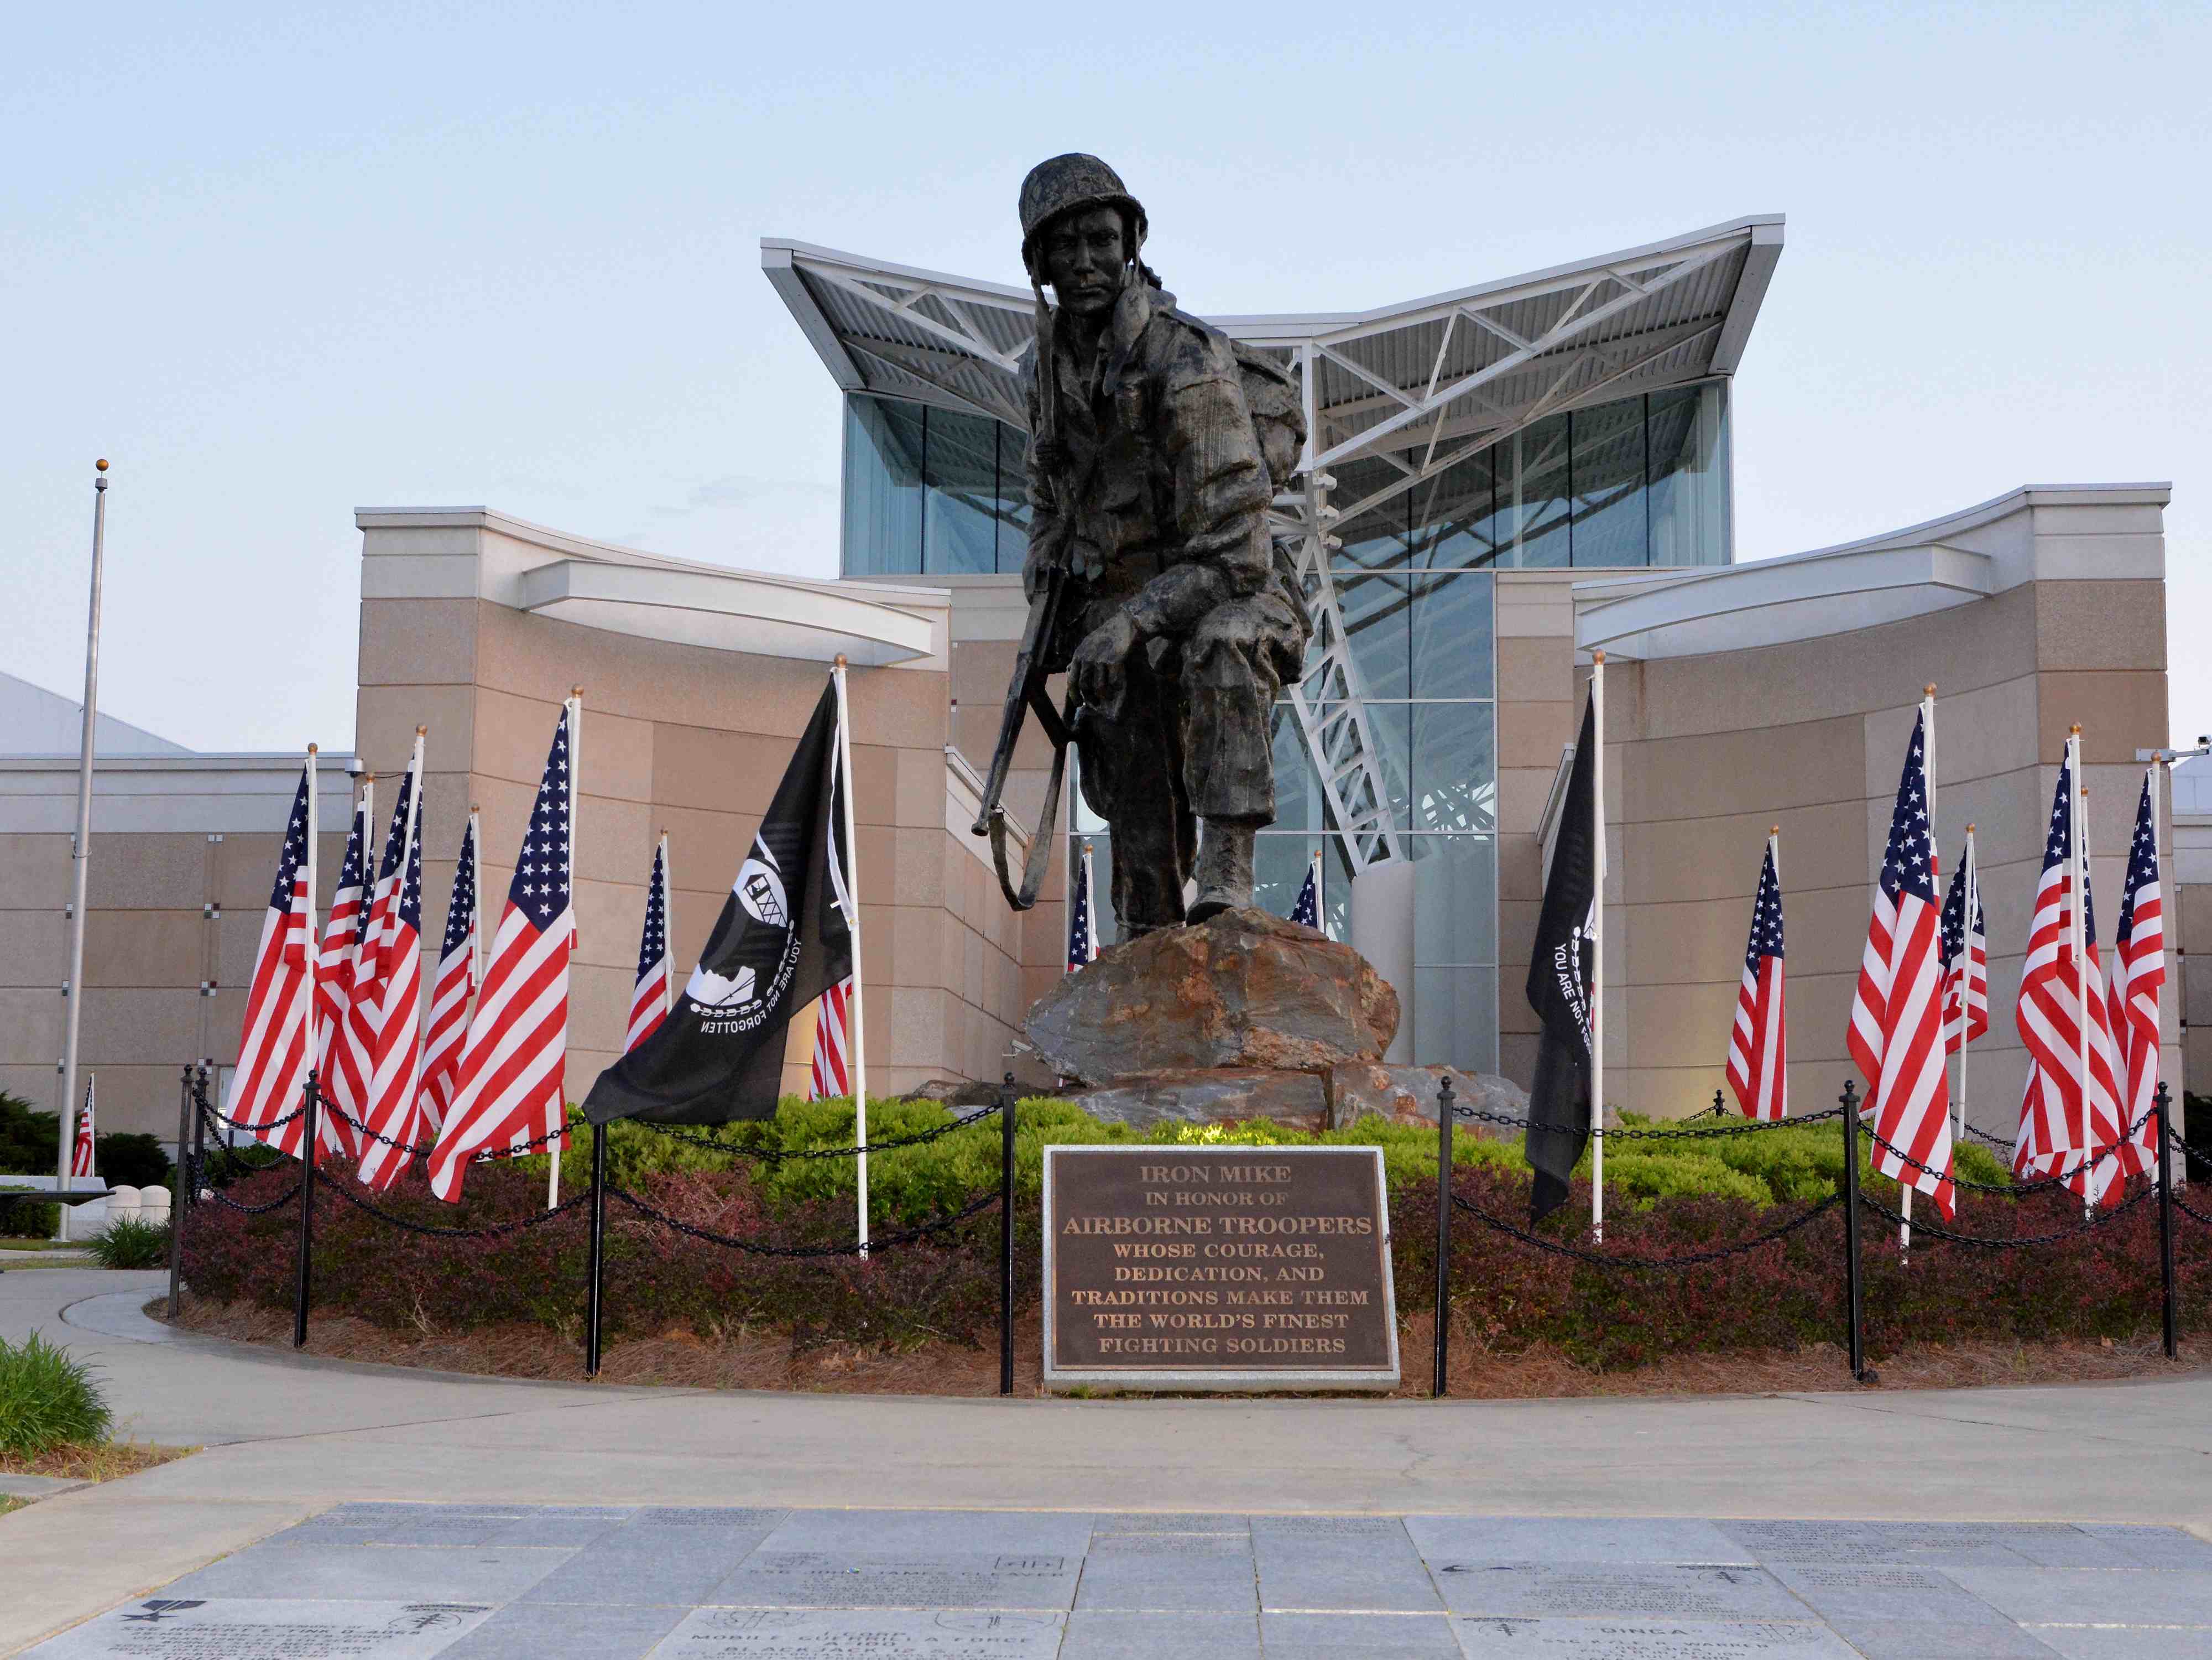 Airborne & Special Operations Museum just a short 10 minute drive